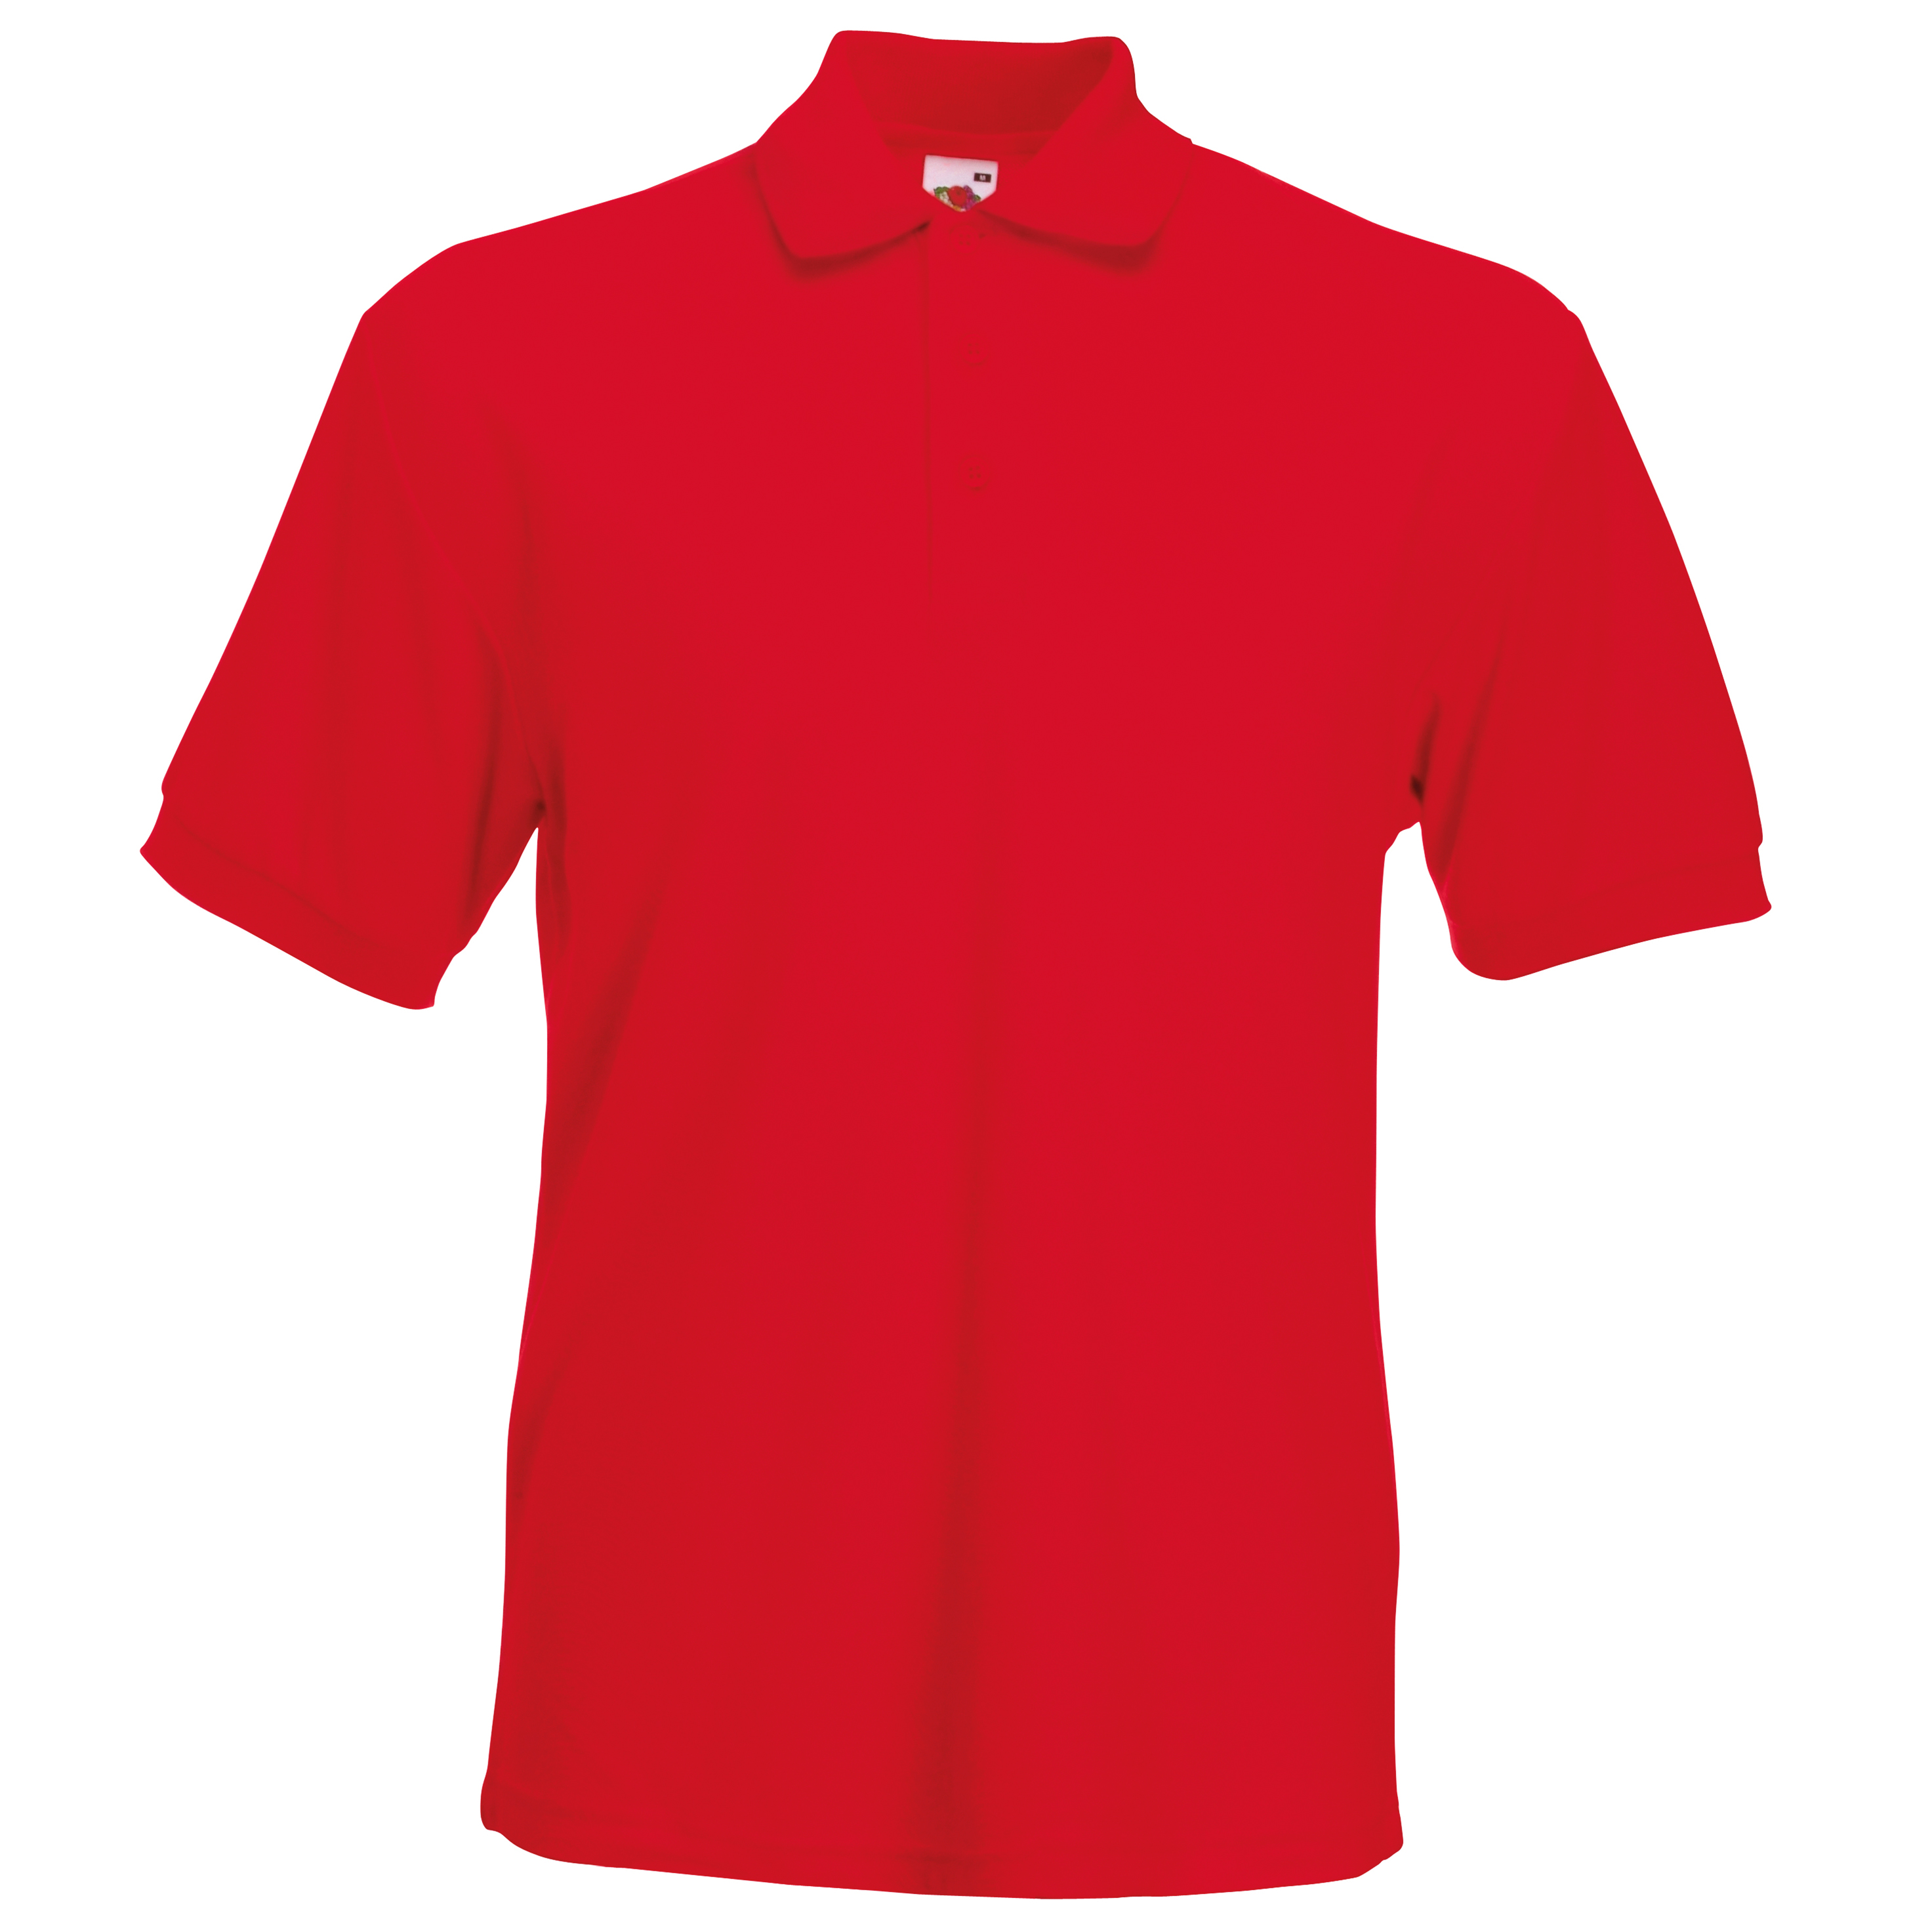 ax-httpswebsystems.s3.amazonaws.comtmp_for_downloadfruit-of-the-loom-heavyweight-65-35-polo-red.jpg